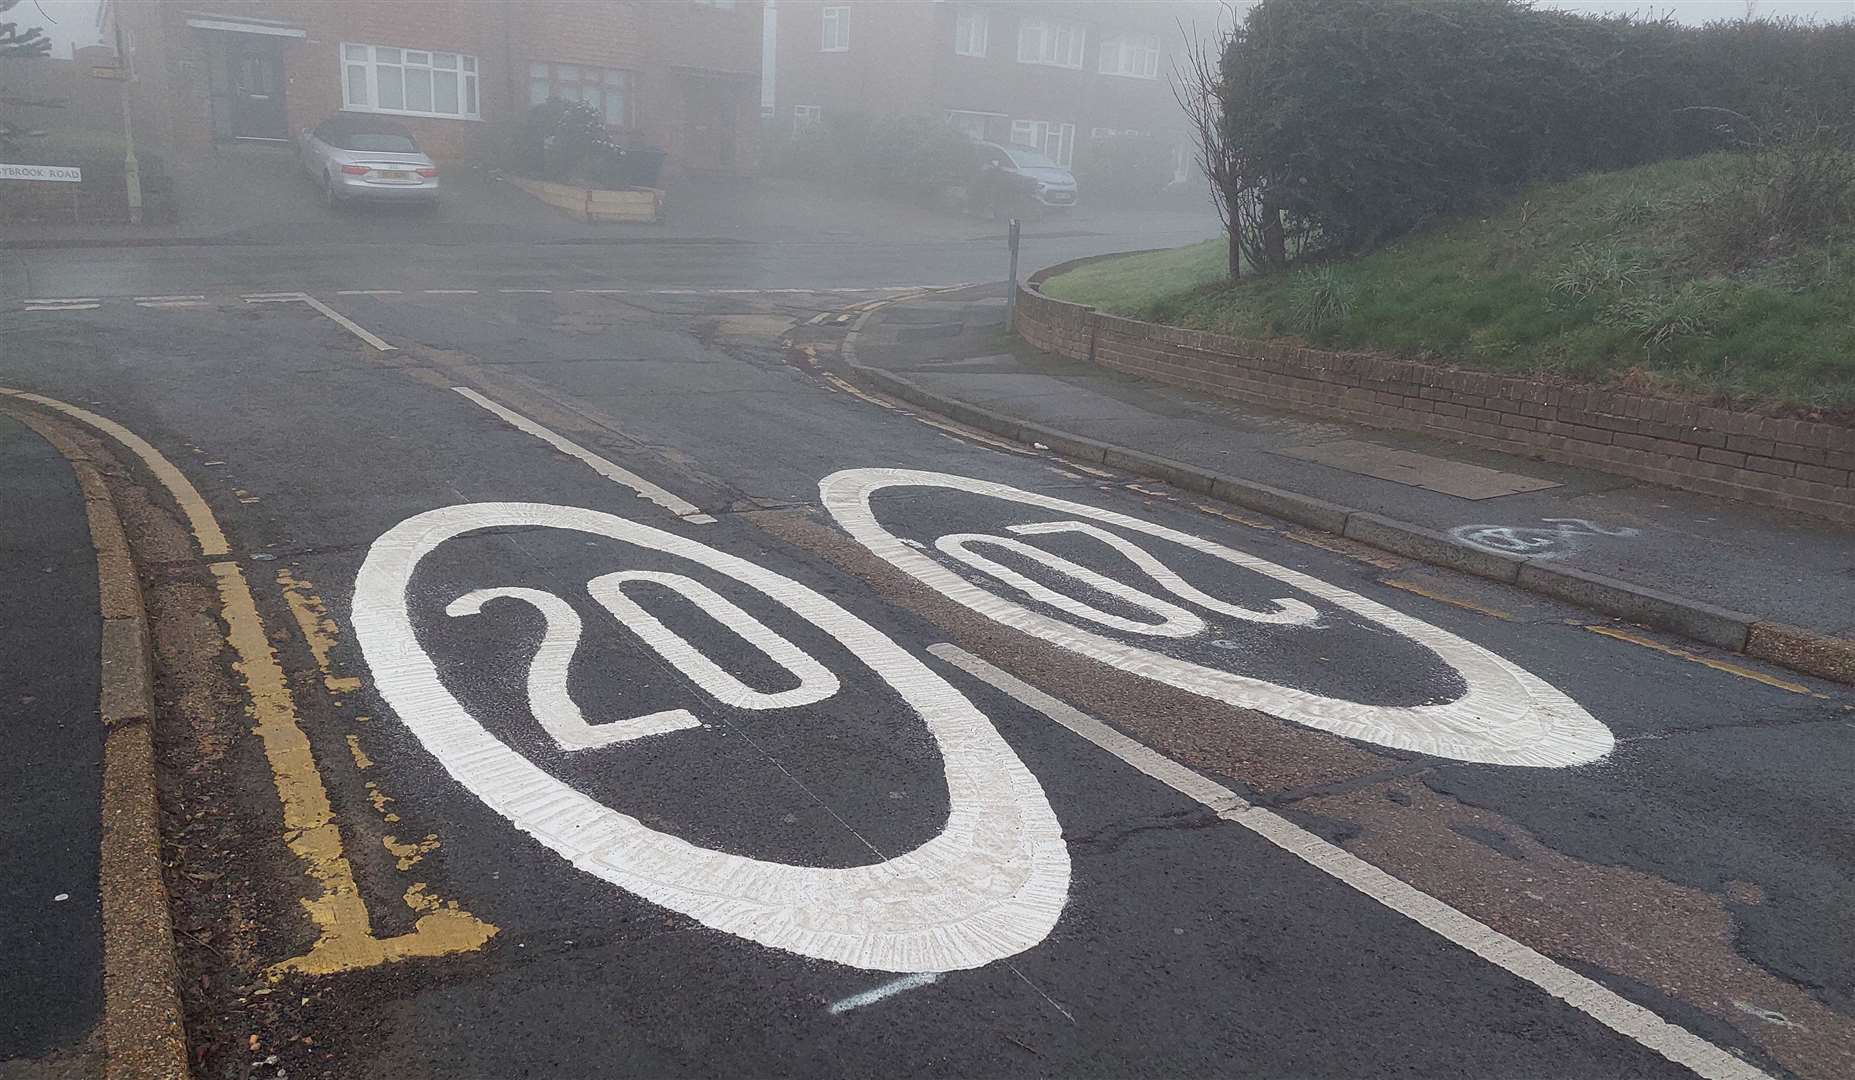 Rylands Road now has 20mph limits painted on the roads